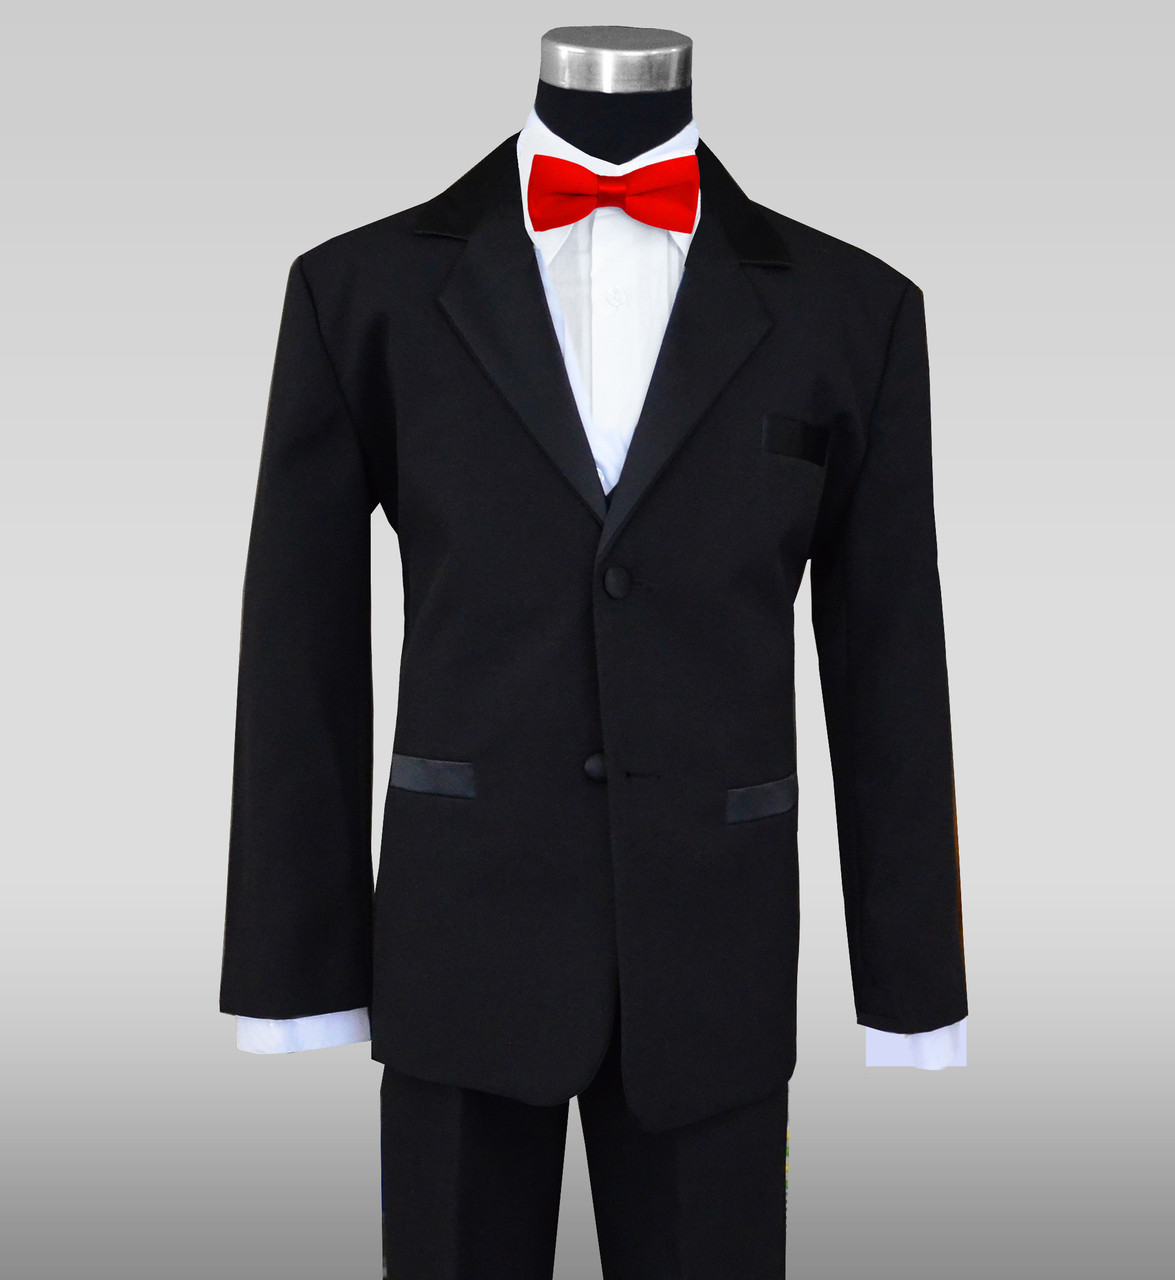 Boys Tuxedos In Black With Red Slim Bow Tie - roblox black suit red tie